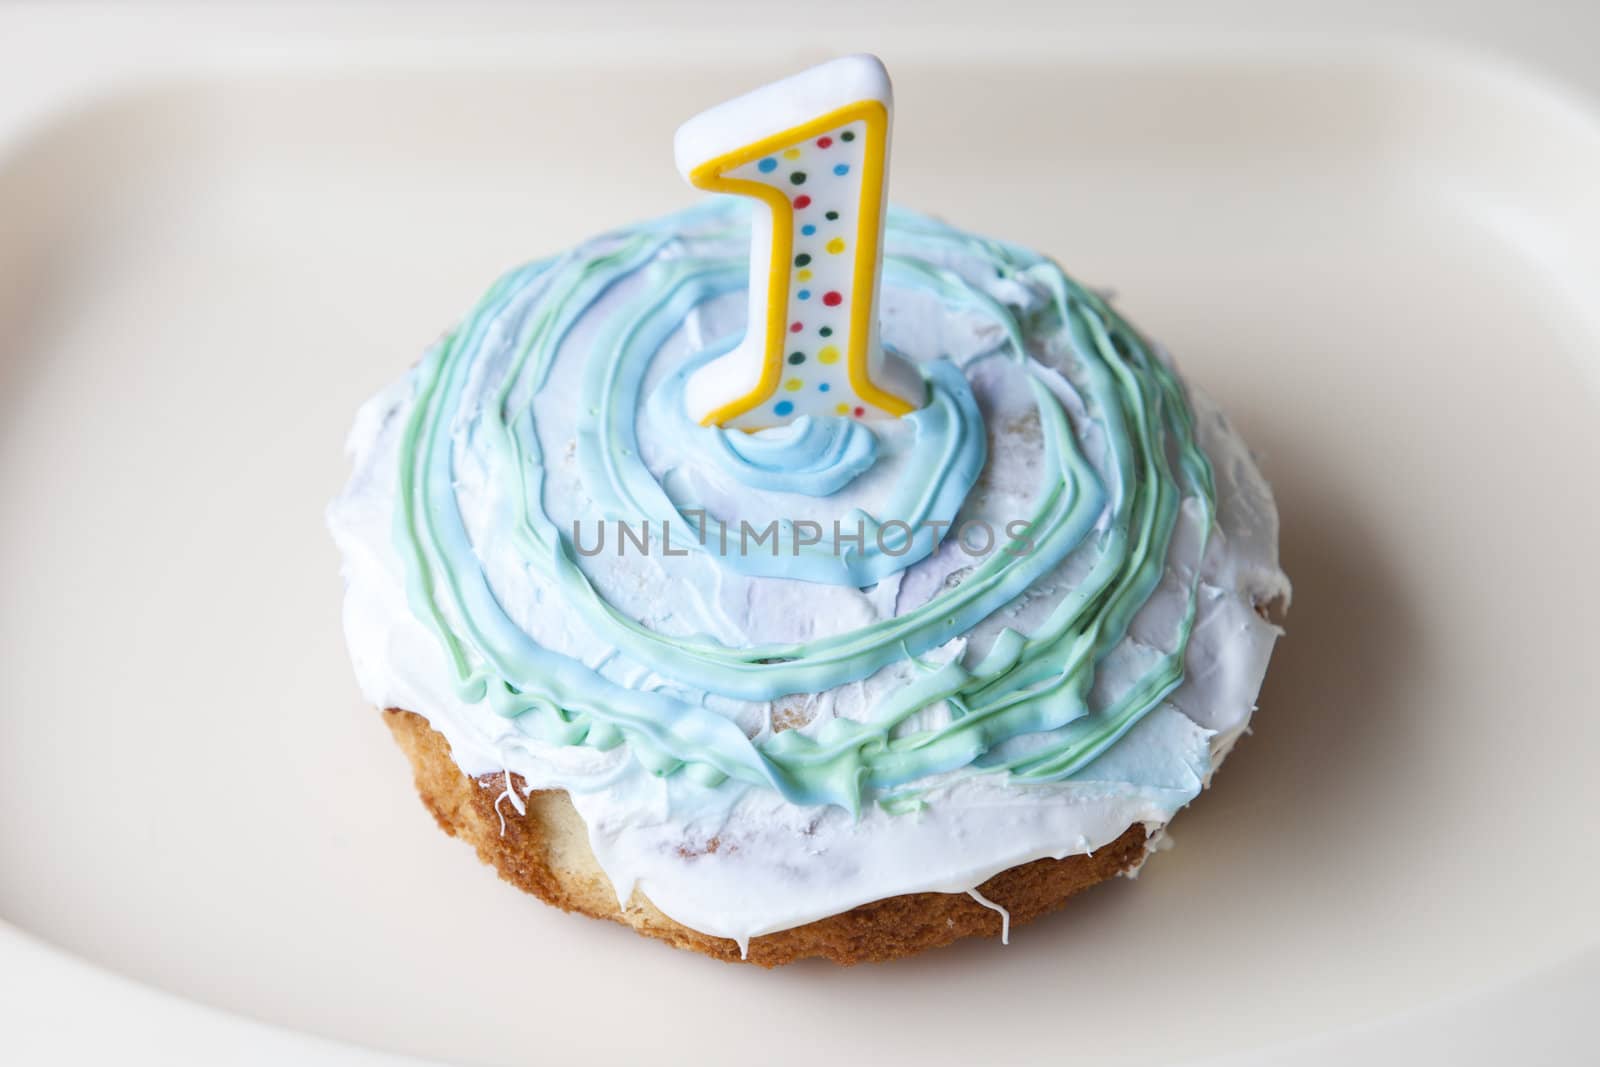 Delicious, gooey smash cake for baby's first birthday